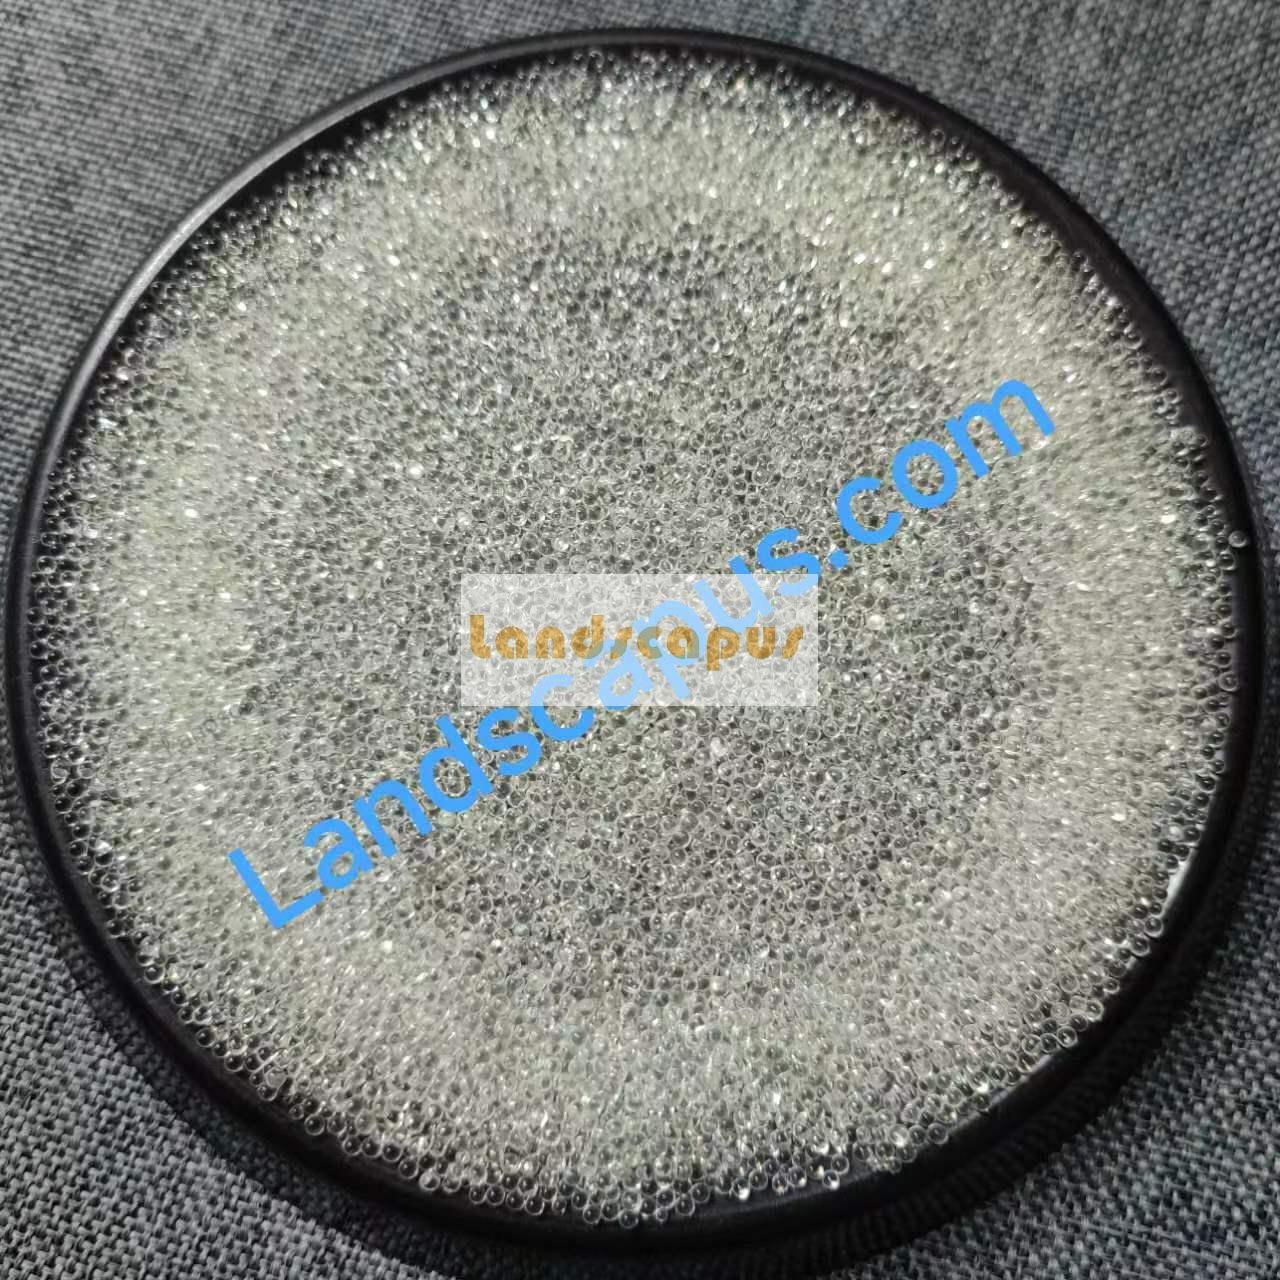 1.7 & 1.8  HR Road Marking Glass Beads